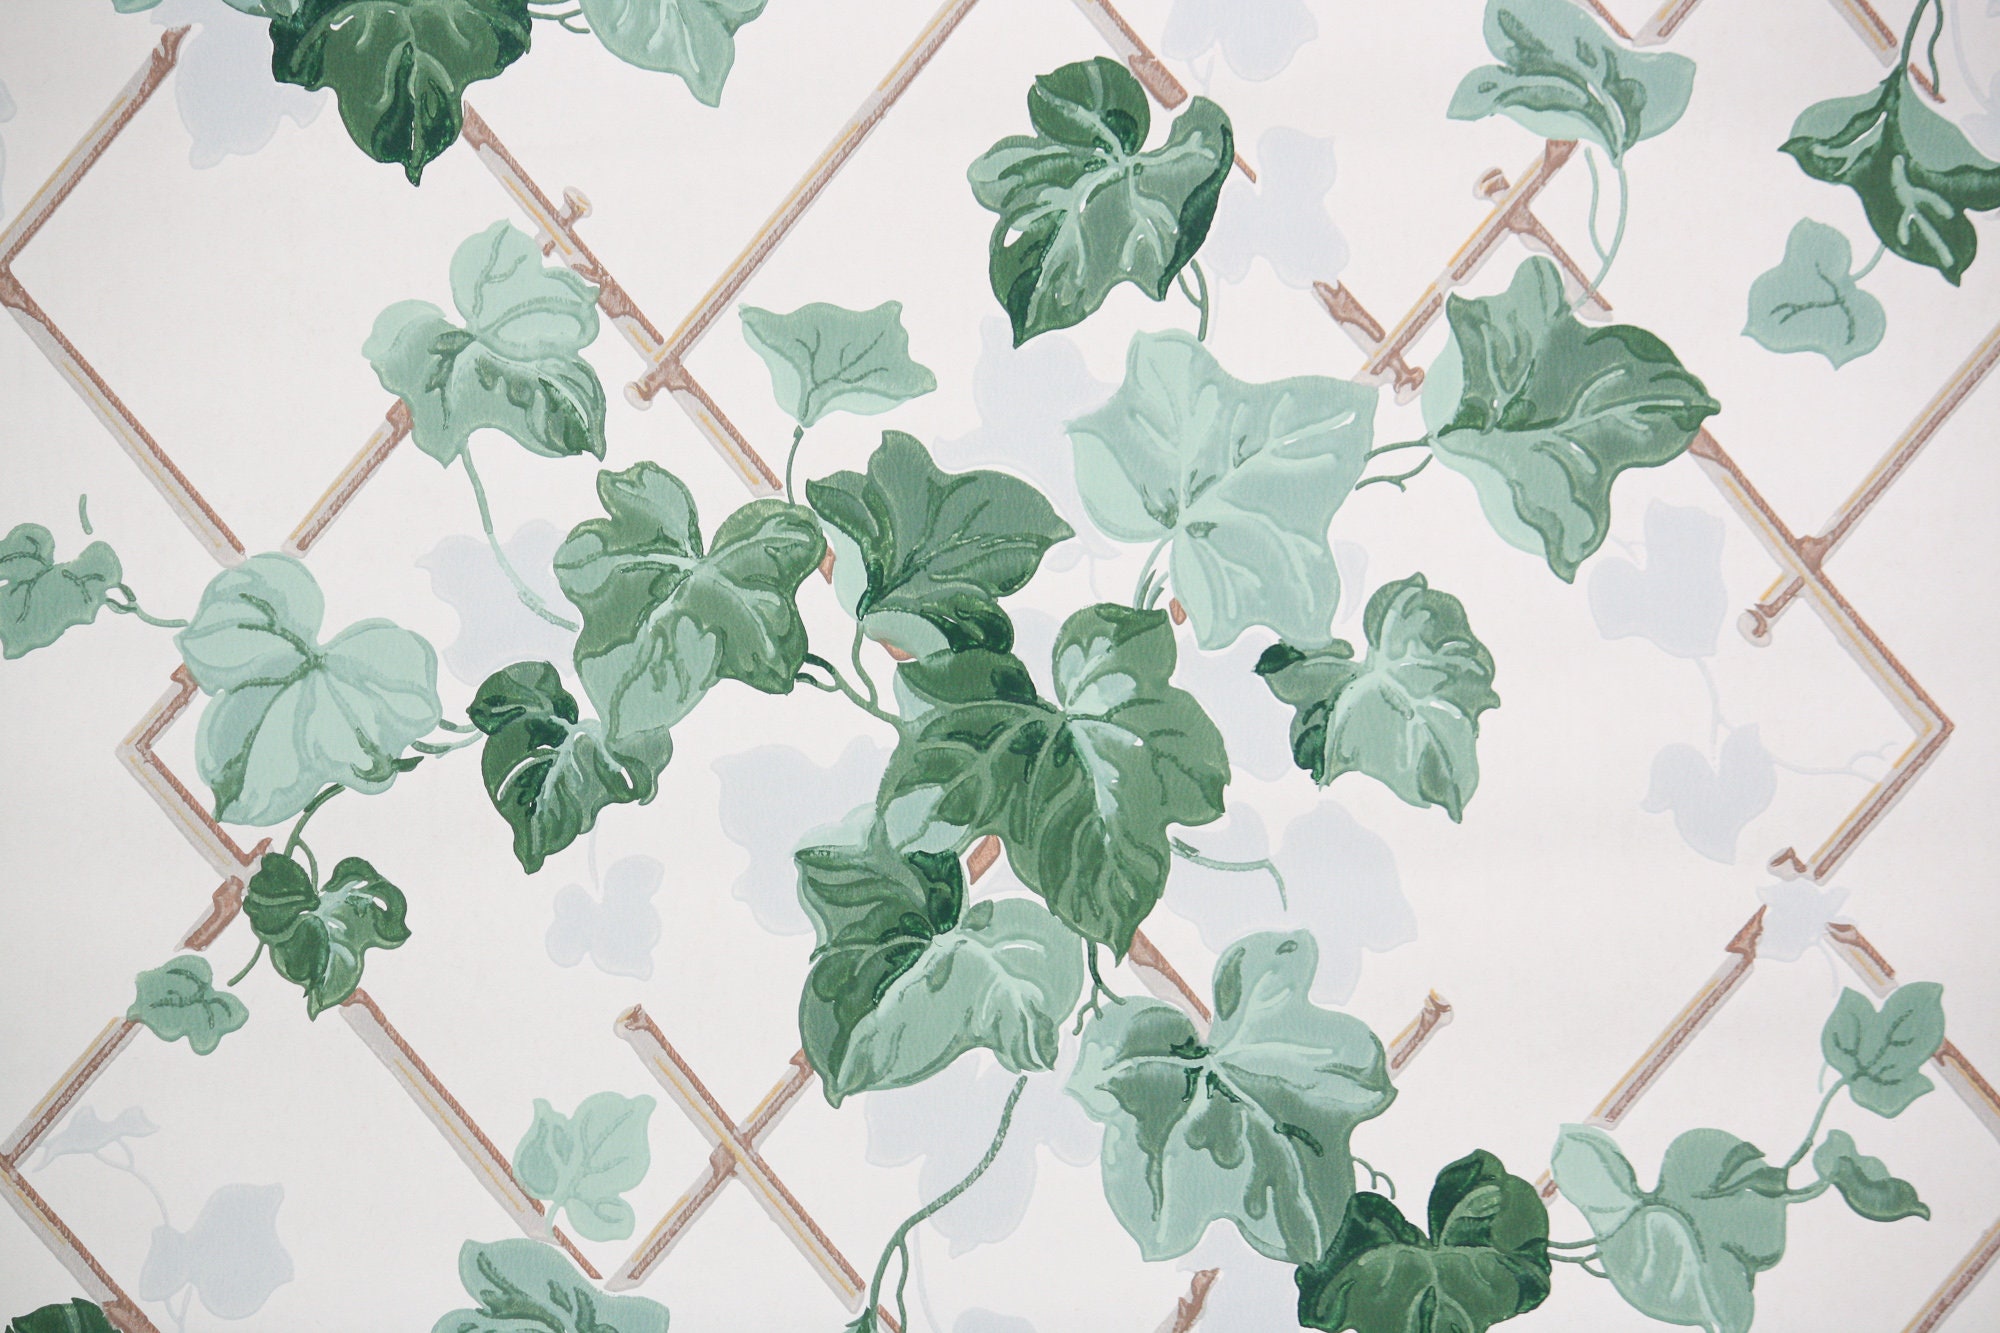 Ivy Wall Pictures  Download Free Images on Unsplash